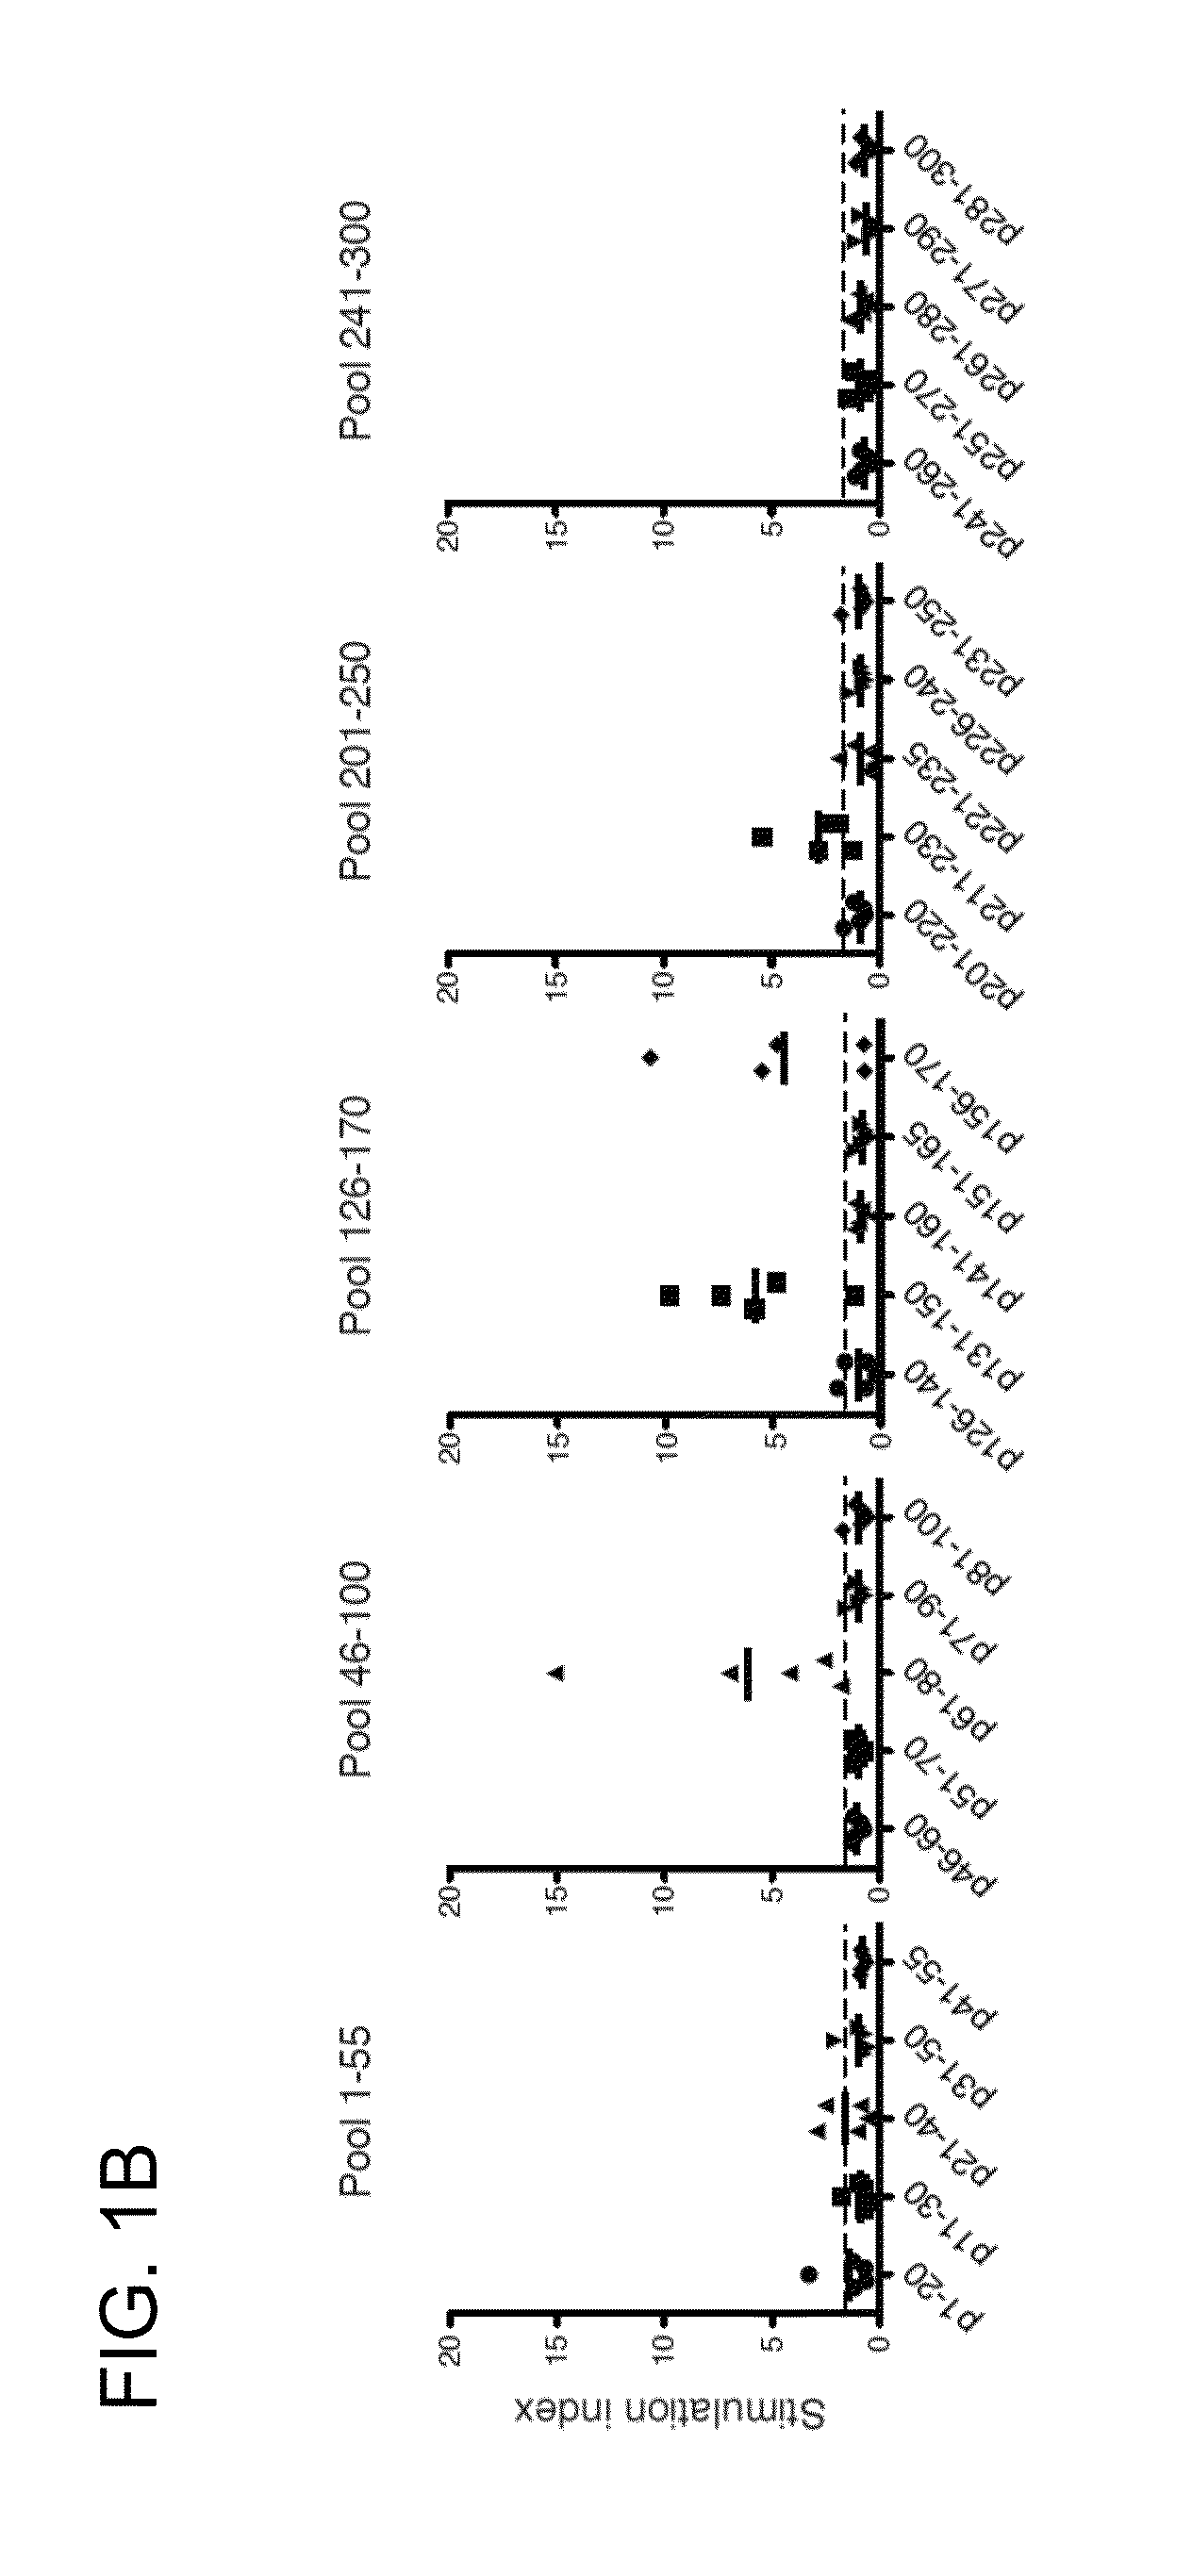 Aquaporin-4 Peptides, Compositions and Methods of Use